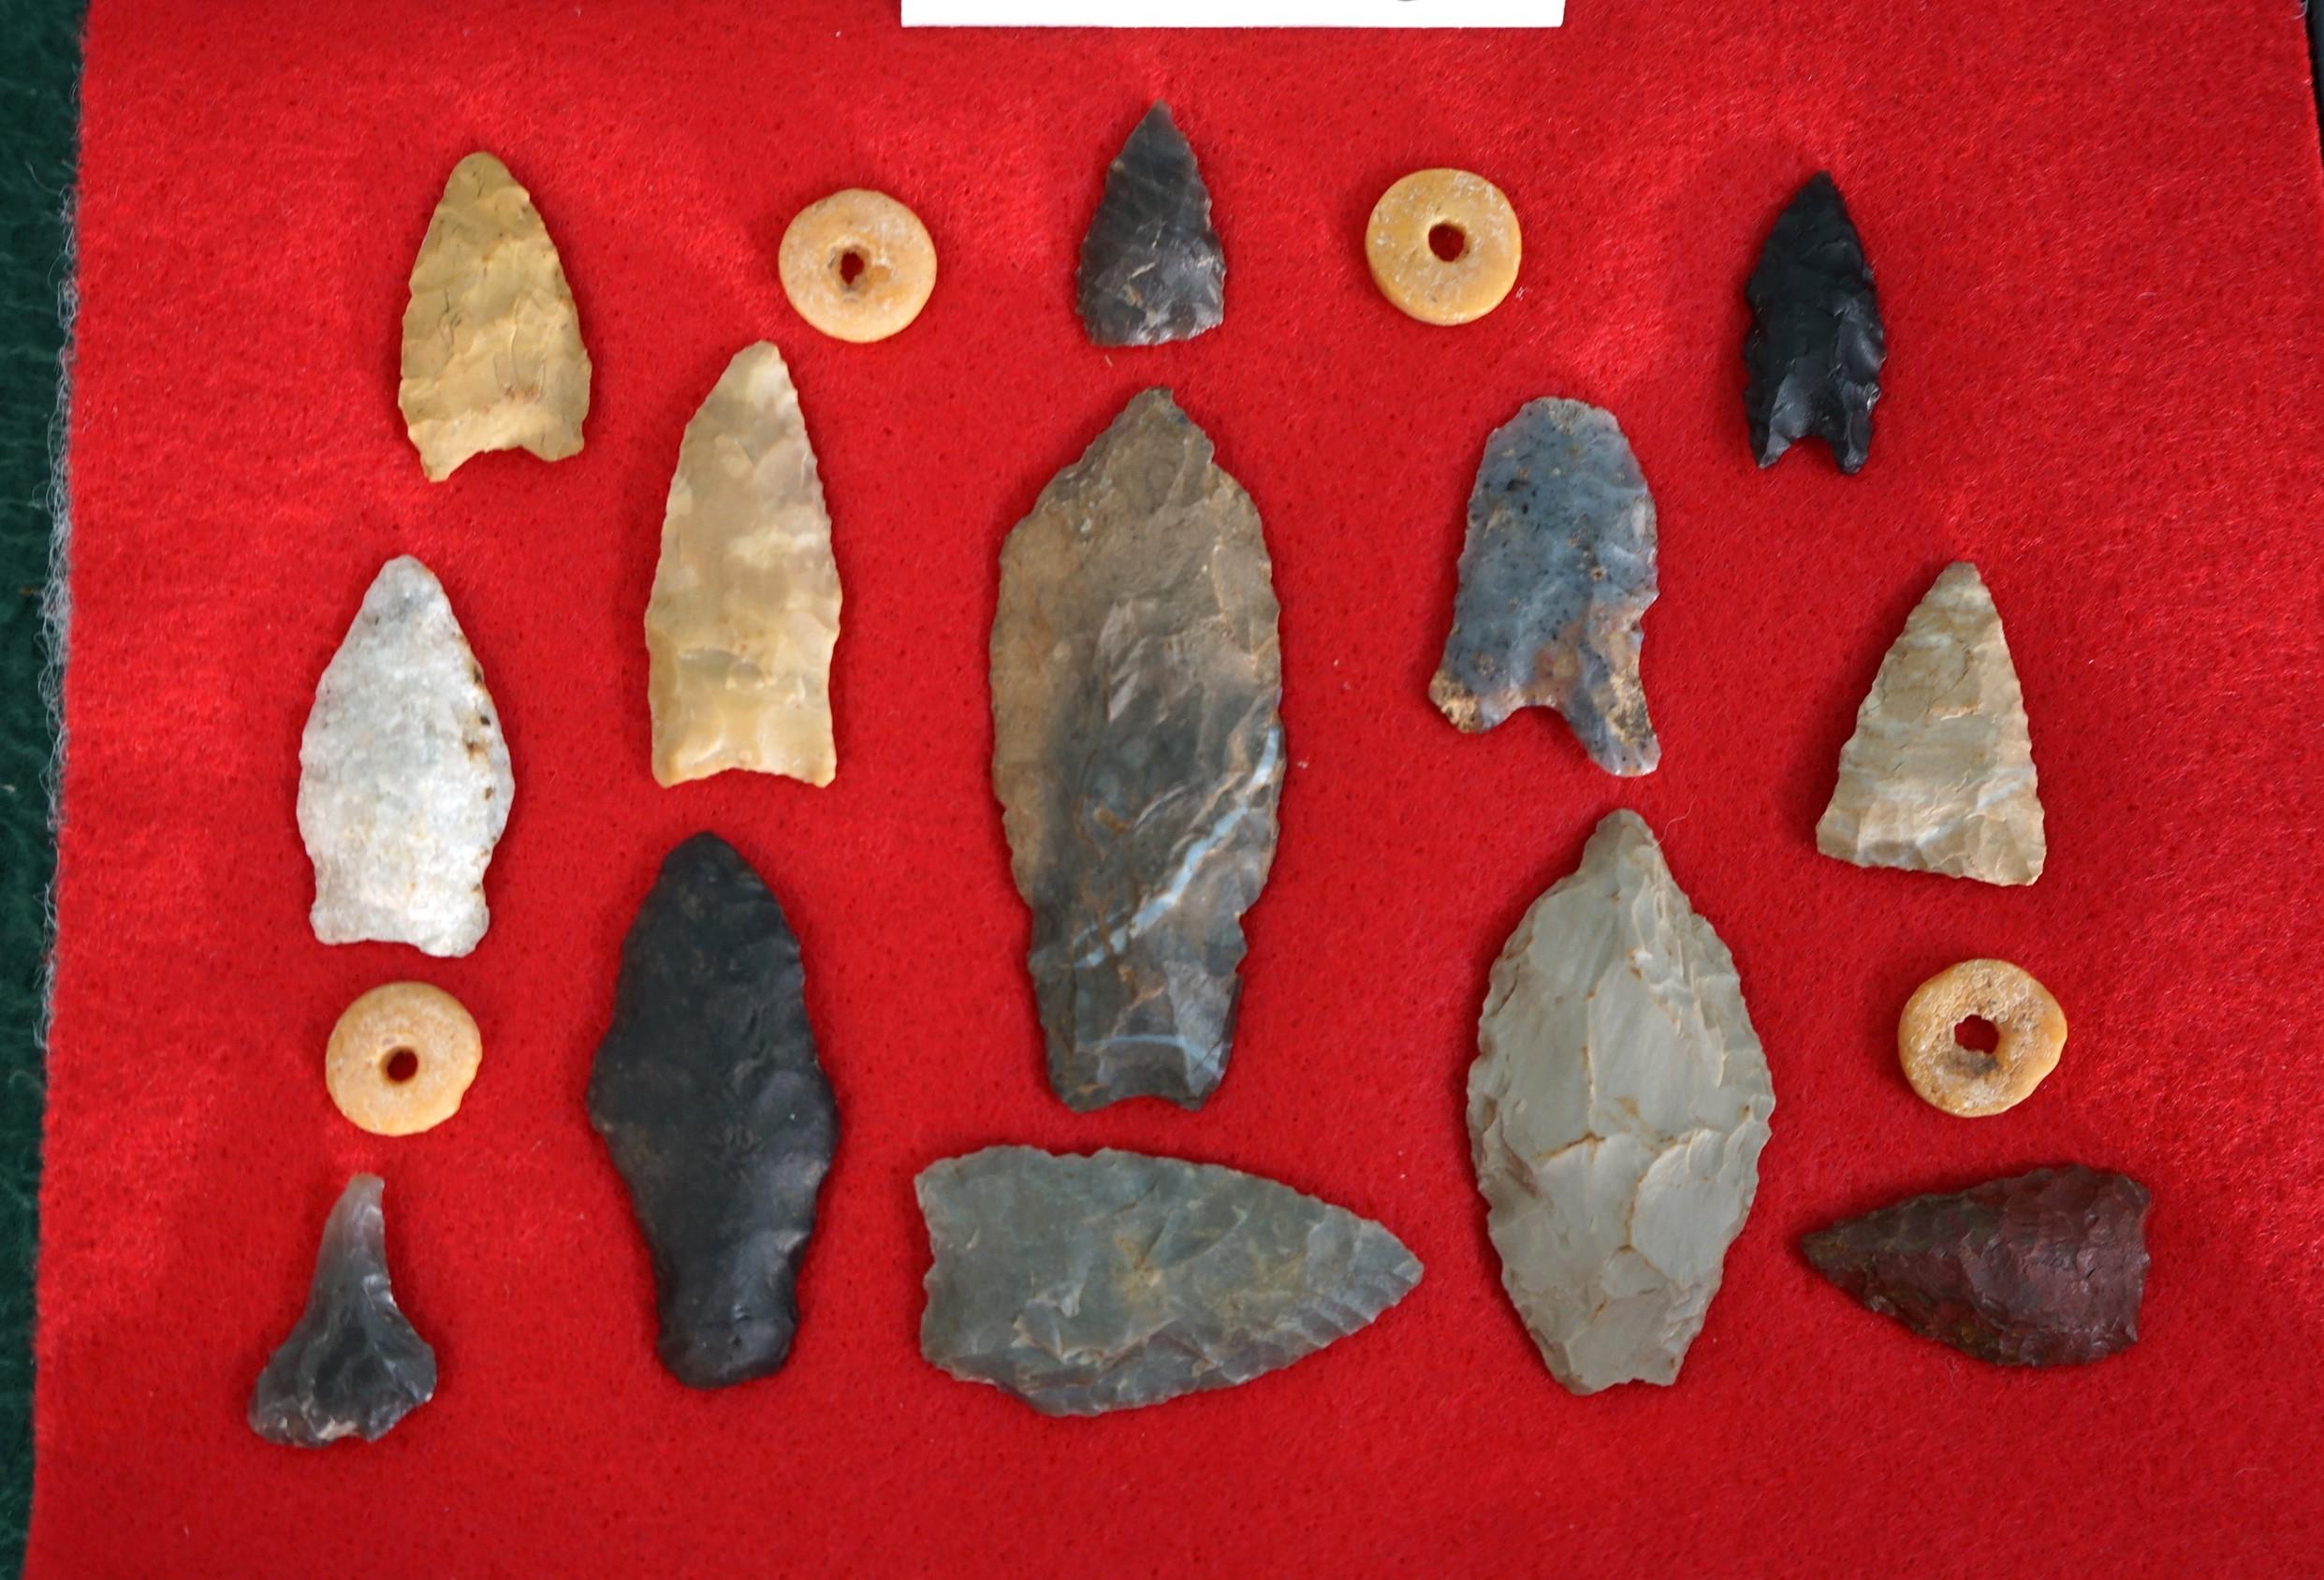 13 Authentic Paleo Arrowheads & Artifacts in Display Case